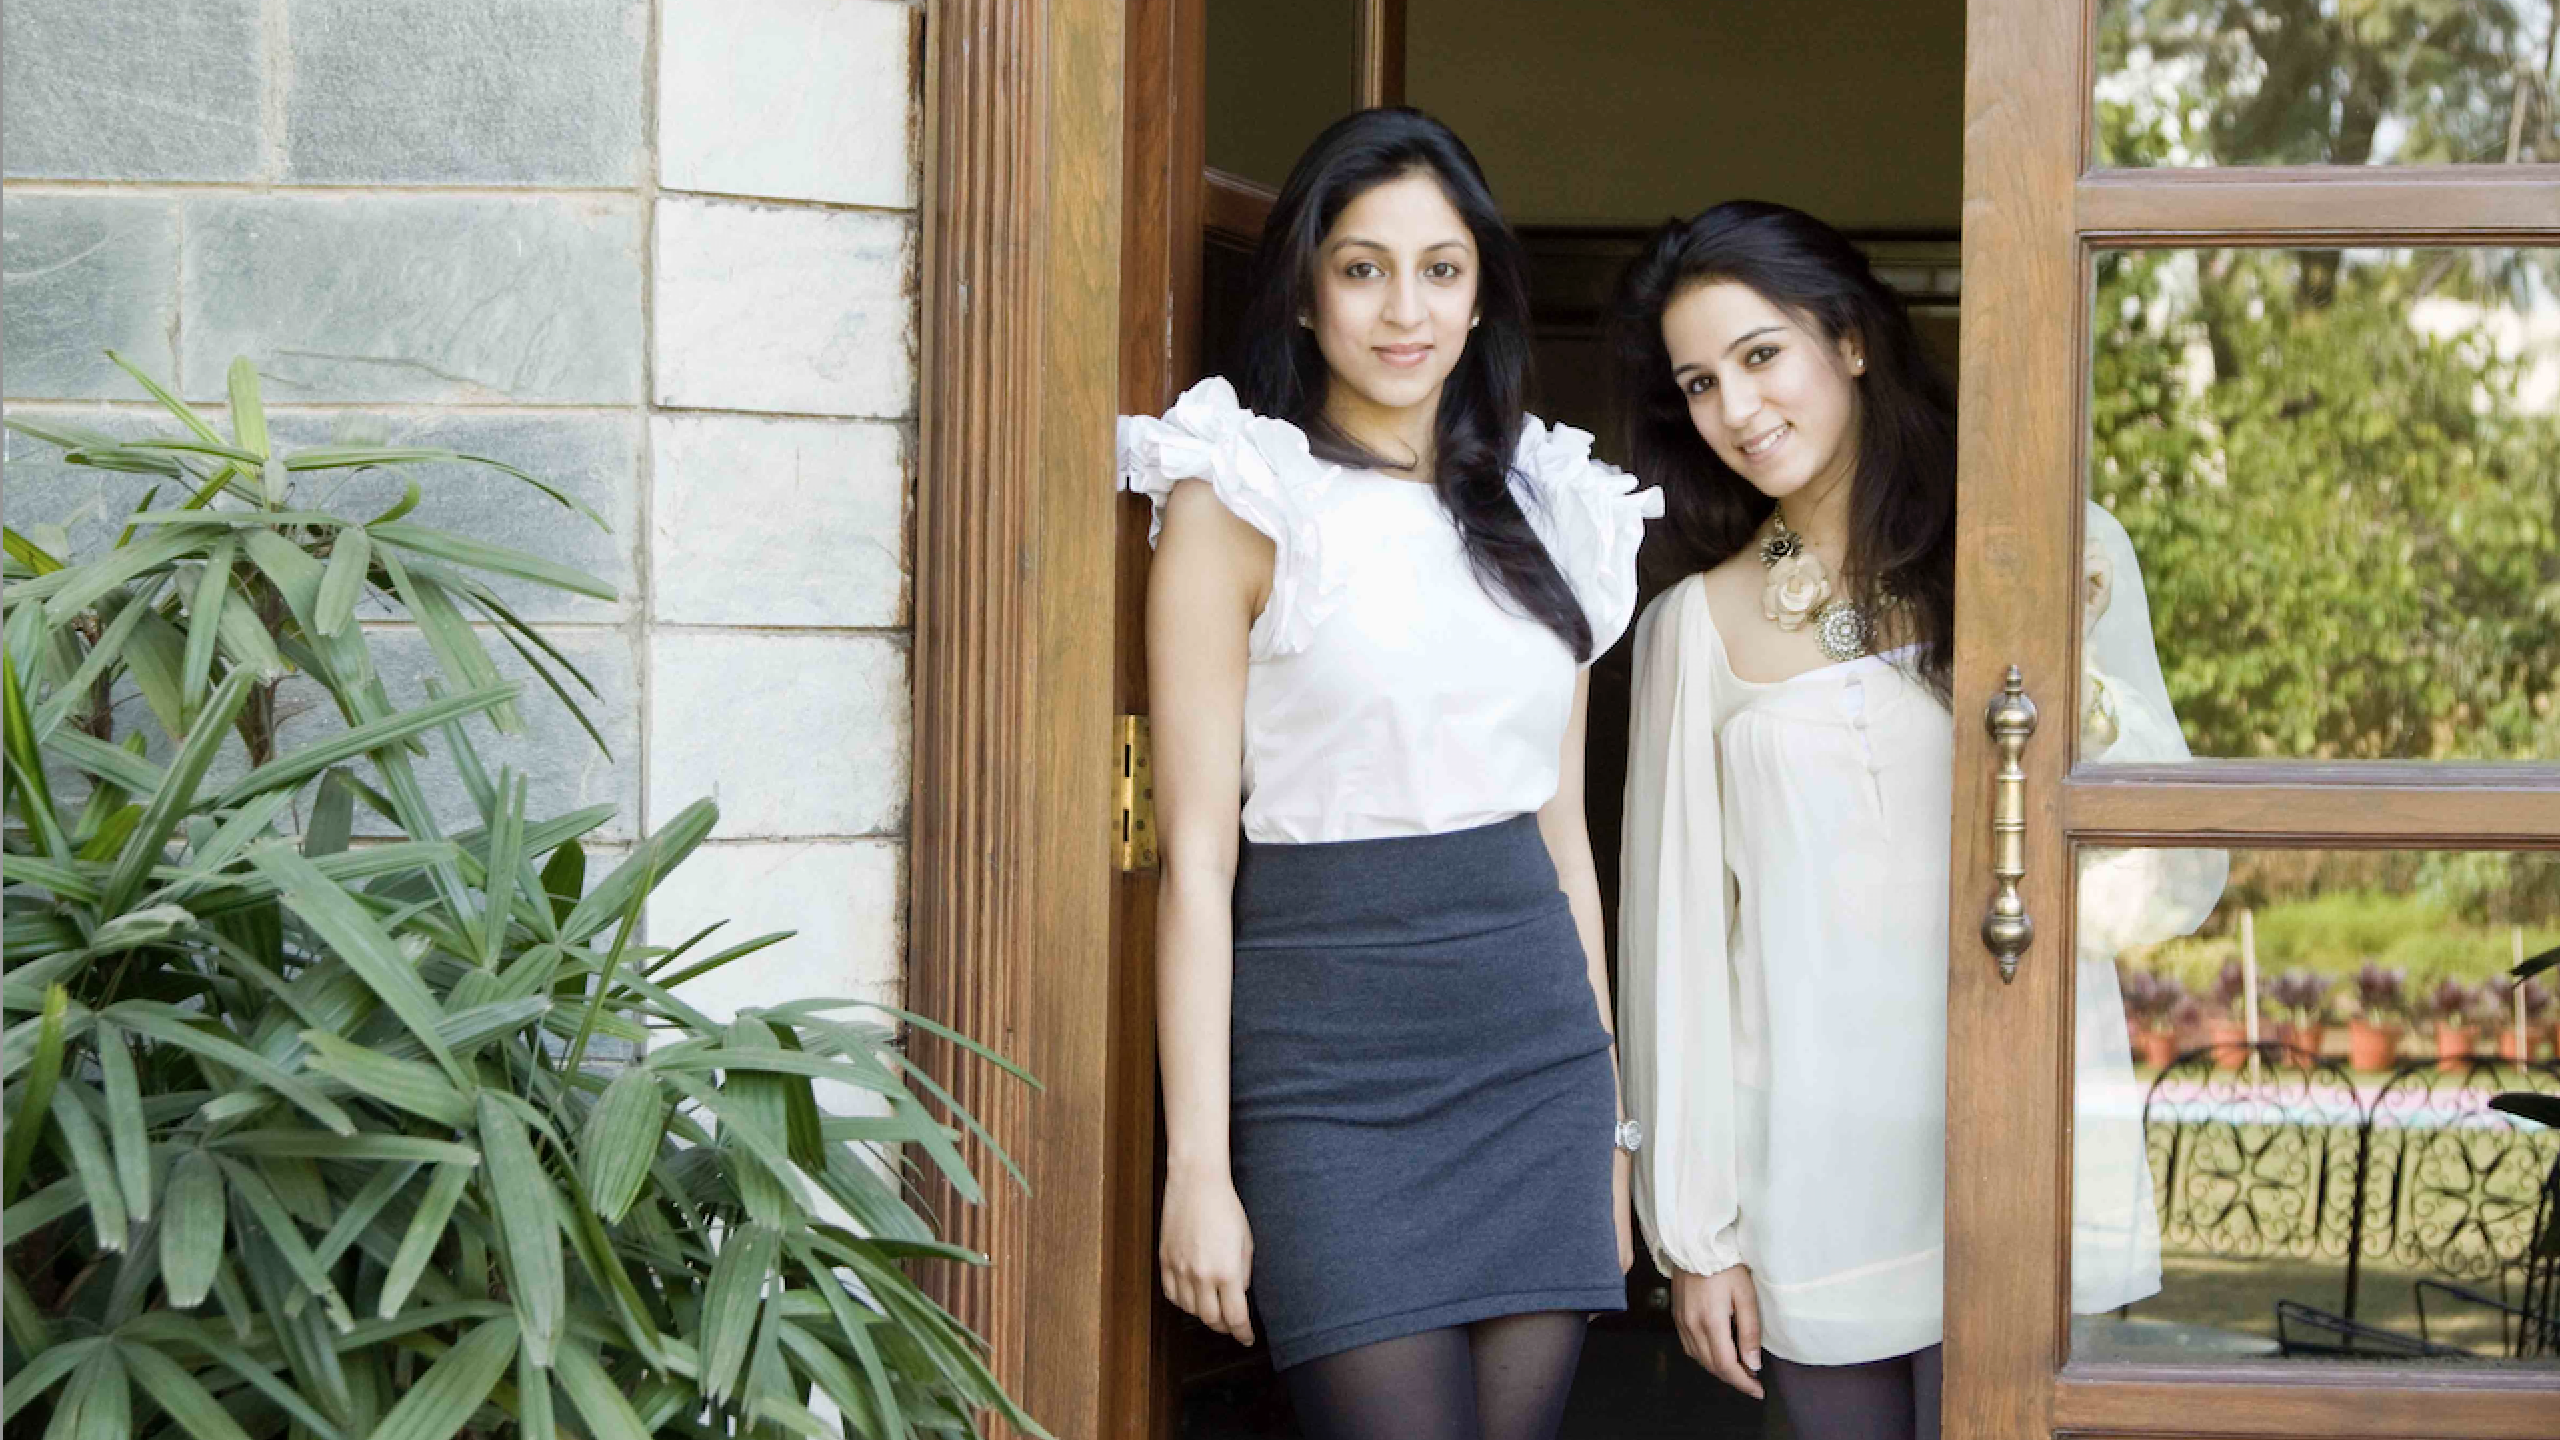 Sisters and FIDM Grads Radhika Mittal and Madhvi Pittie stand in a wooden doorway